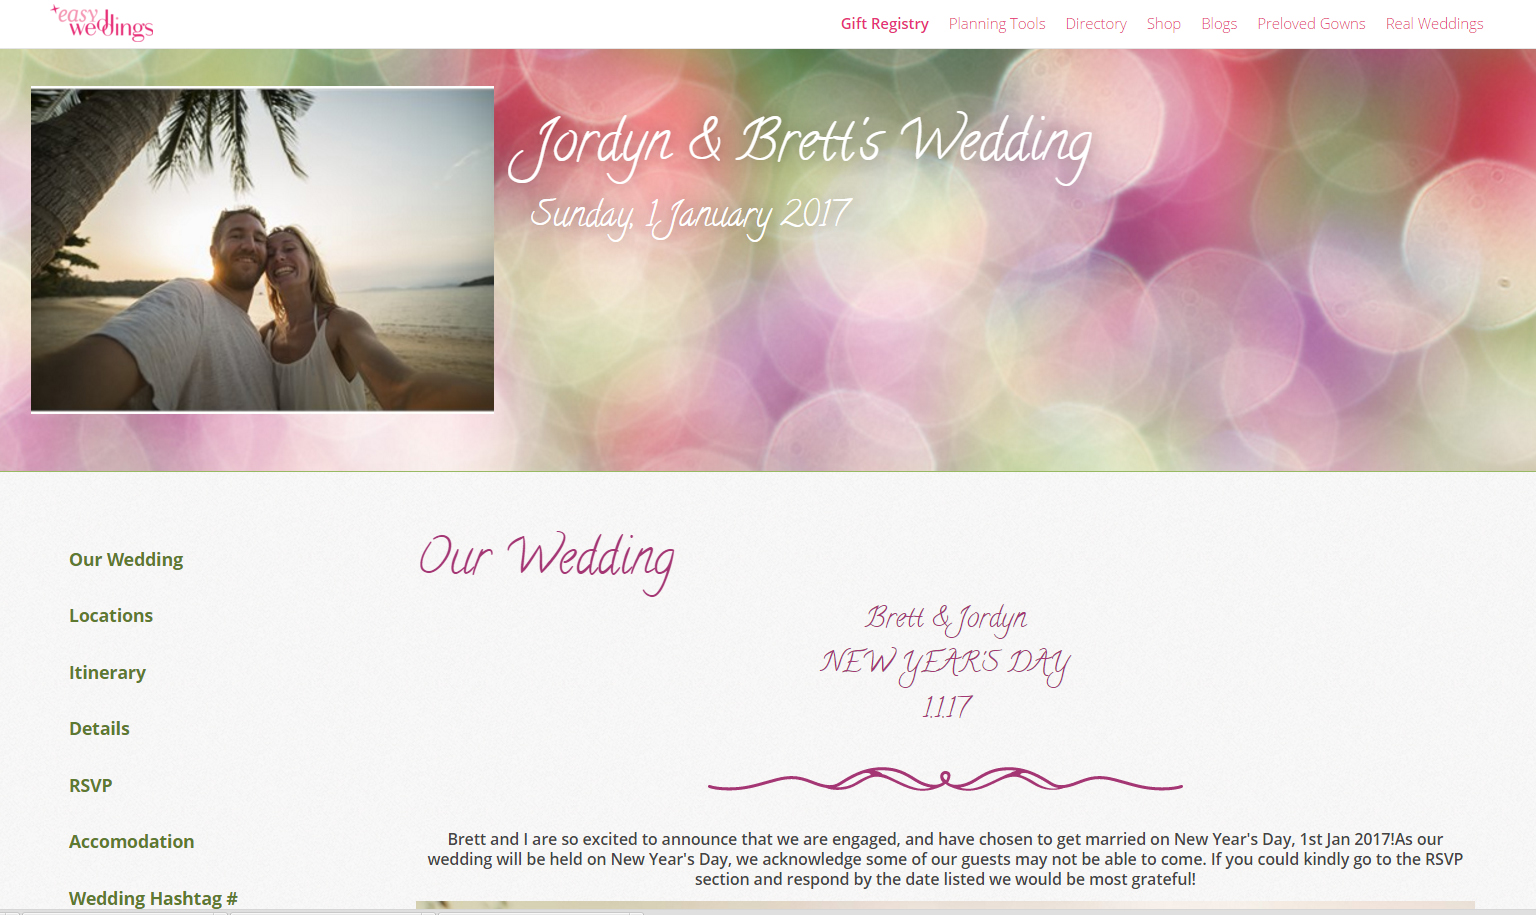 Easy weddings - free wedding website - announce your engagement